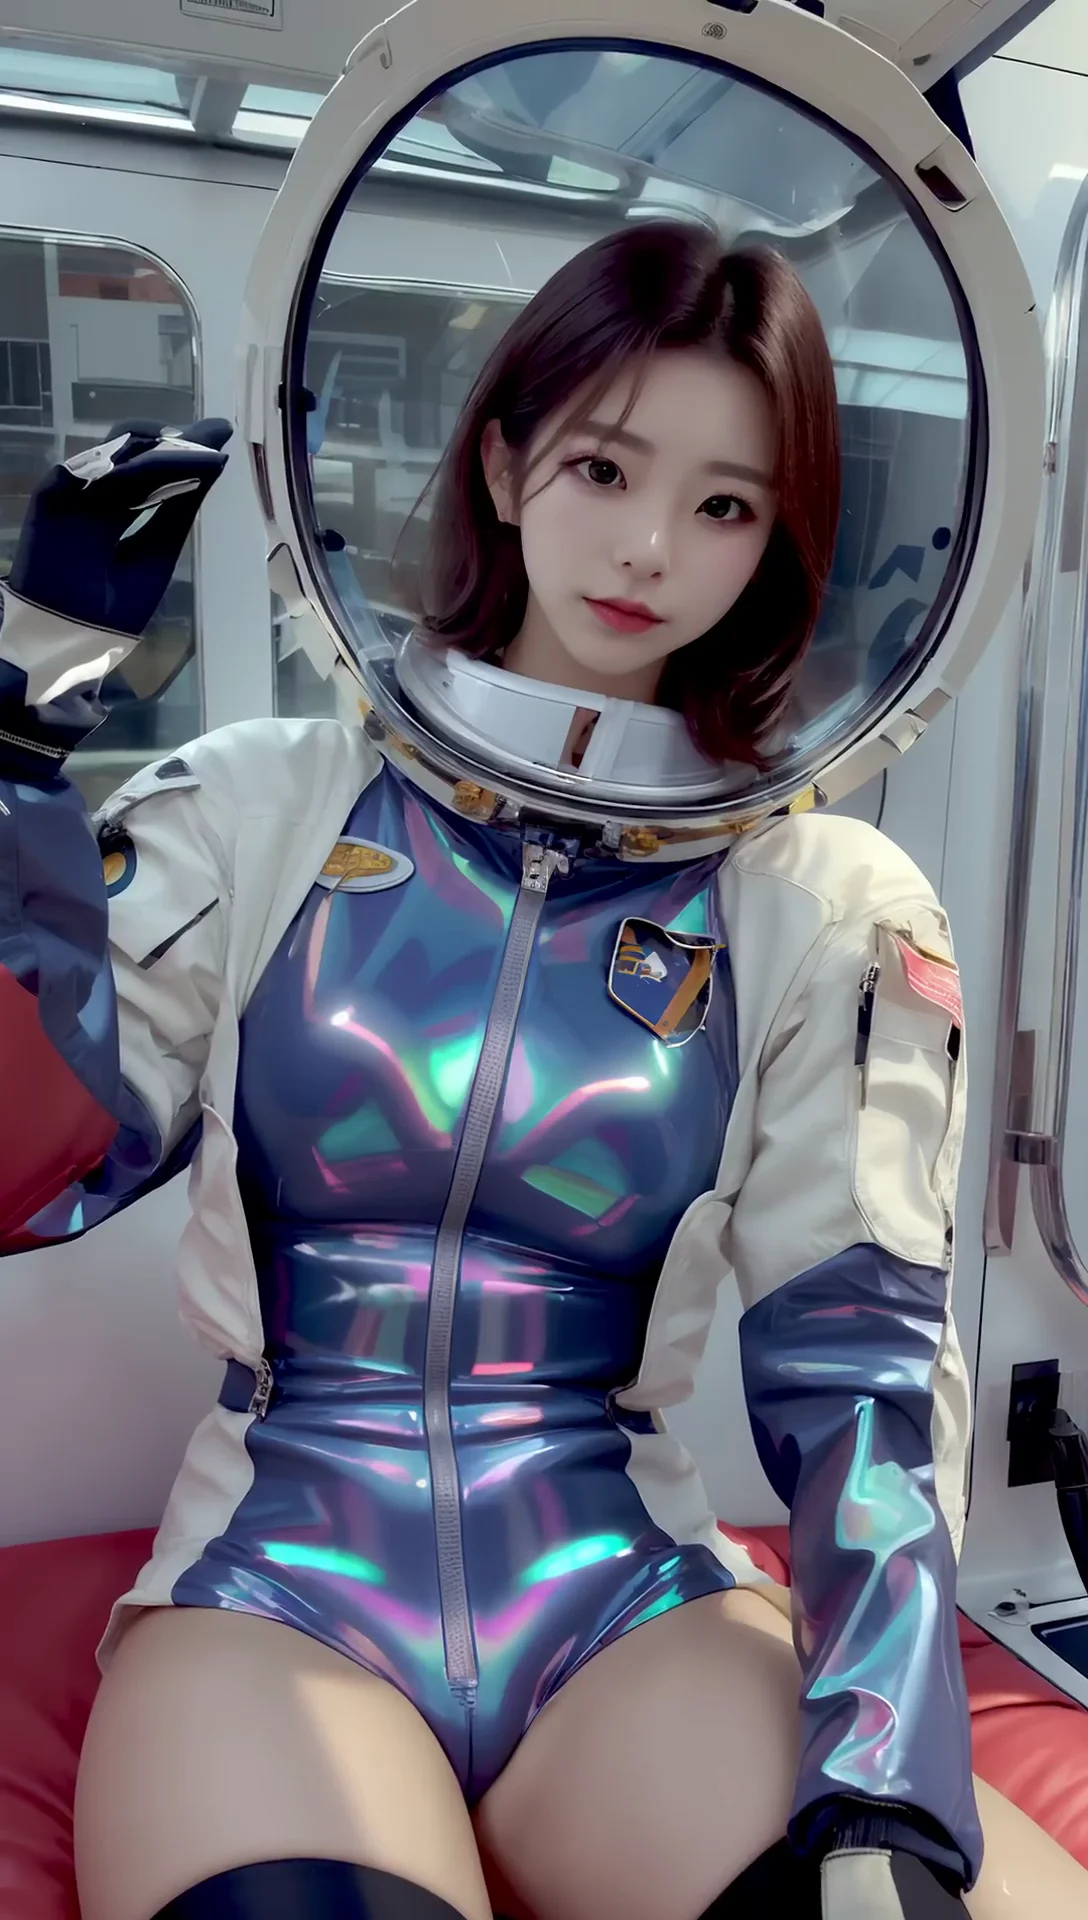 Ai Lookbook 19: Space Wanderer Girls Vol. 2 Images 20